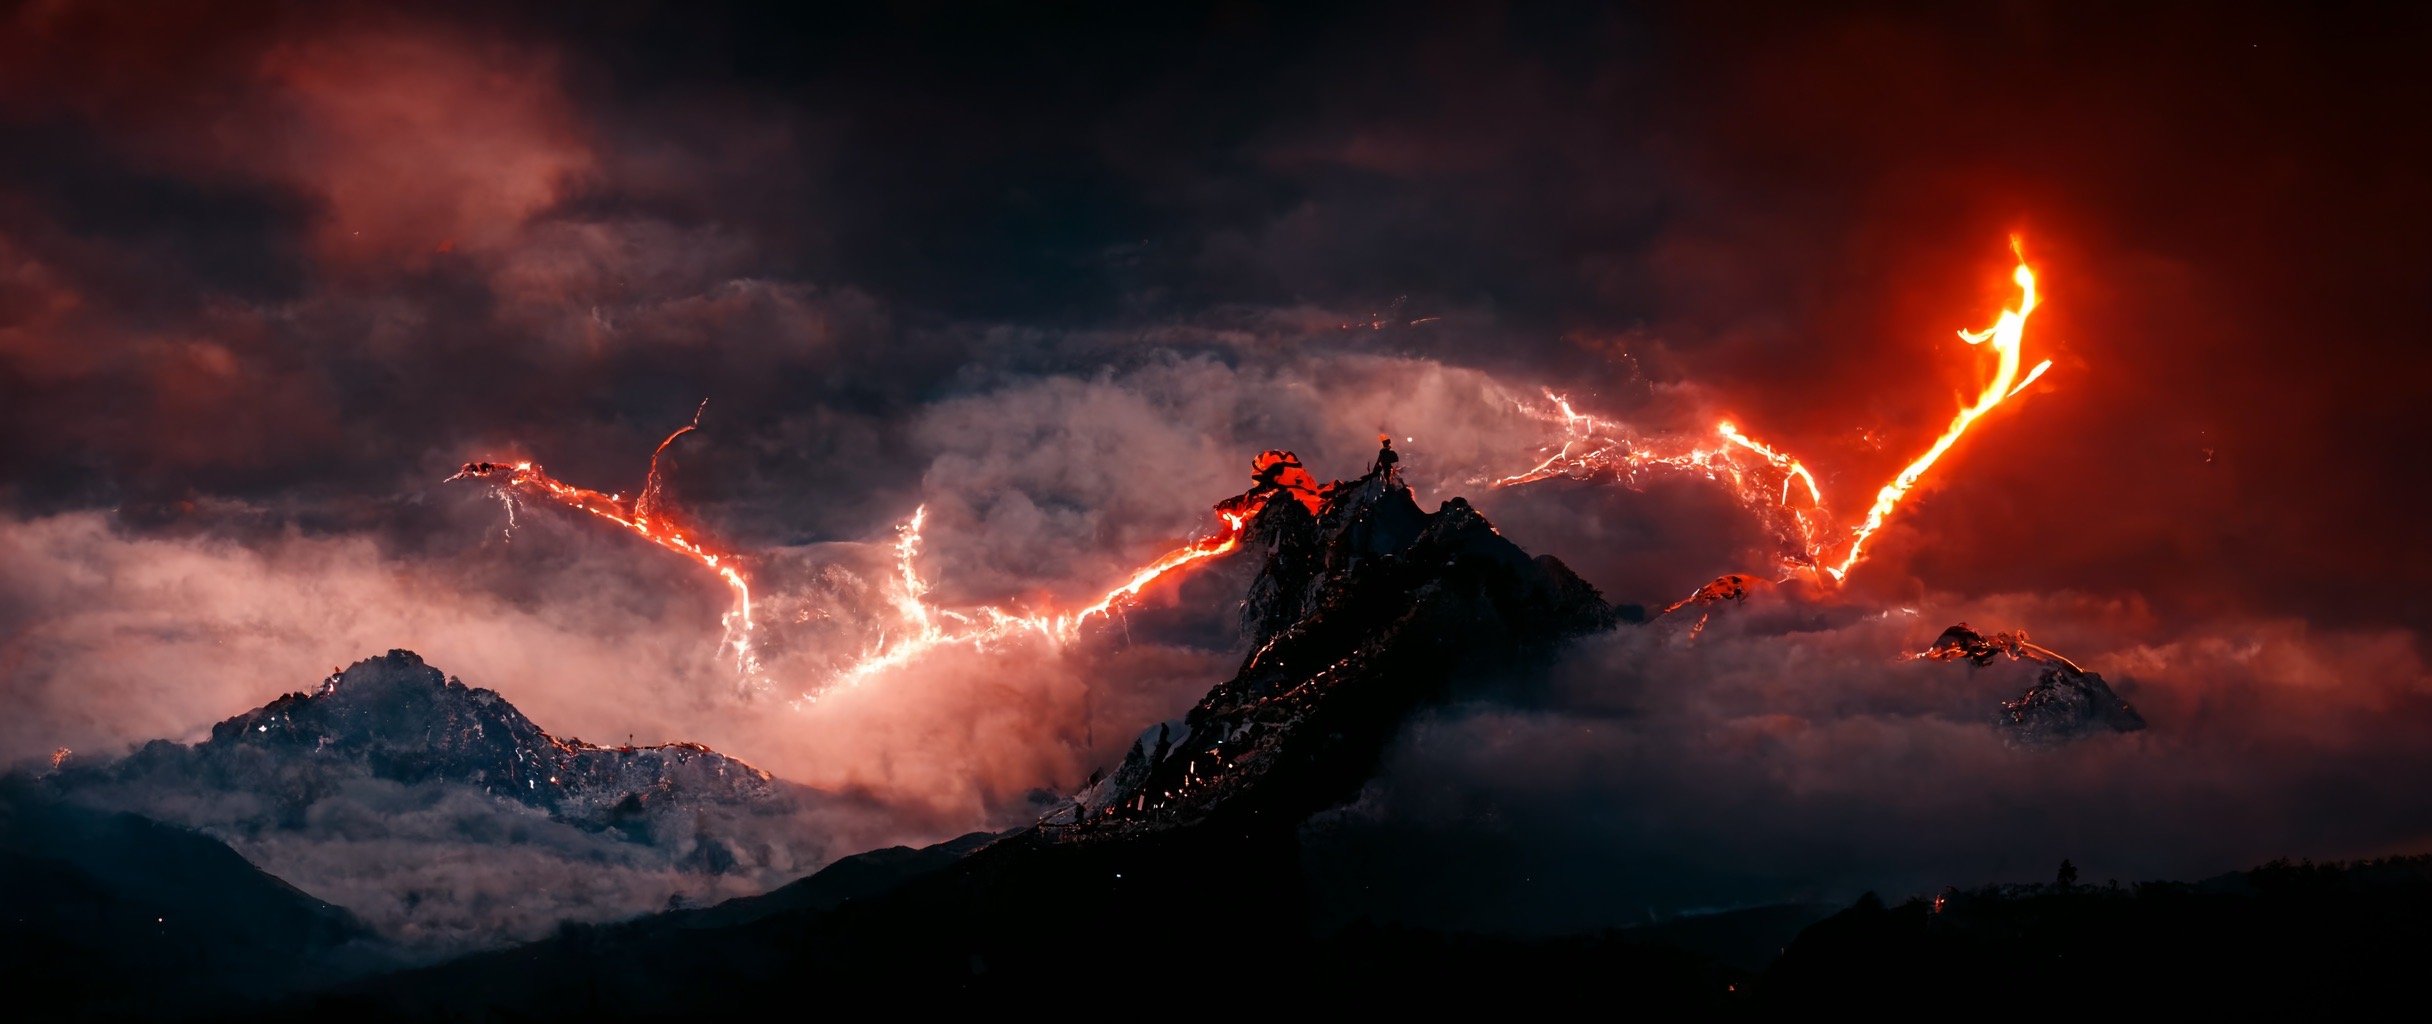 98e77c53-950c-4a9b-822e-e894adc54c3f_S3RAPH_1_dragon_with_ruby_eyes_and_breathing_fire_and_lightning_over_the_top_of_a_majestic_mountain._Epic_s.JPG